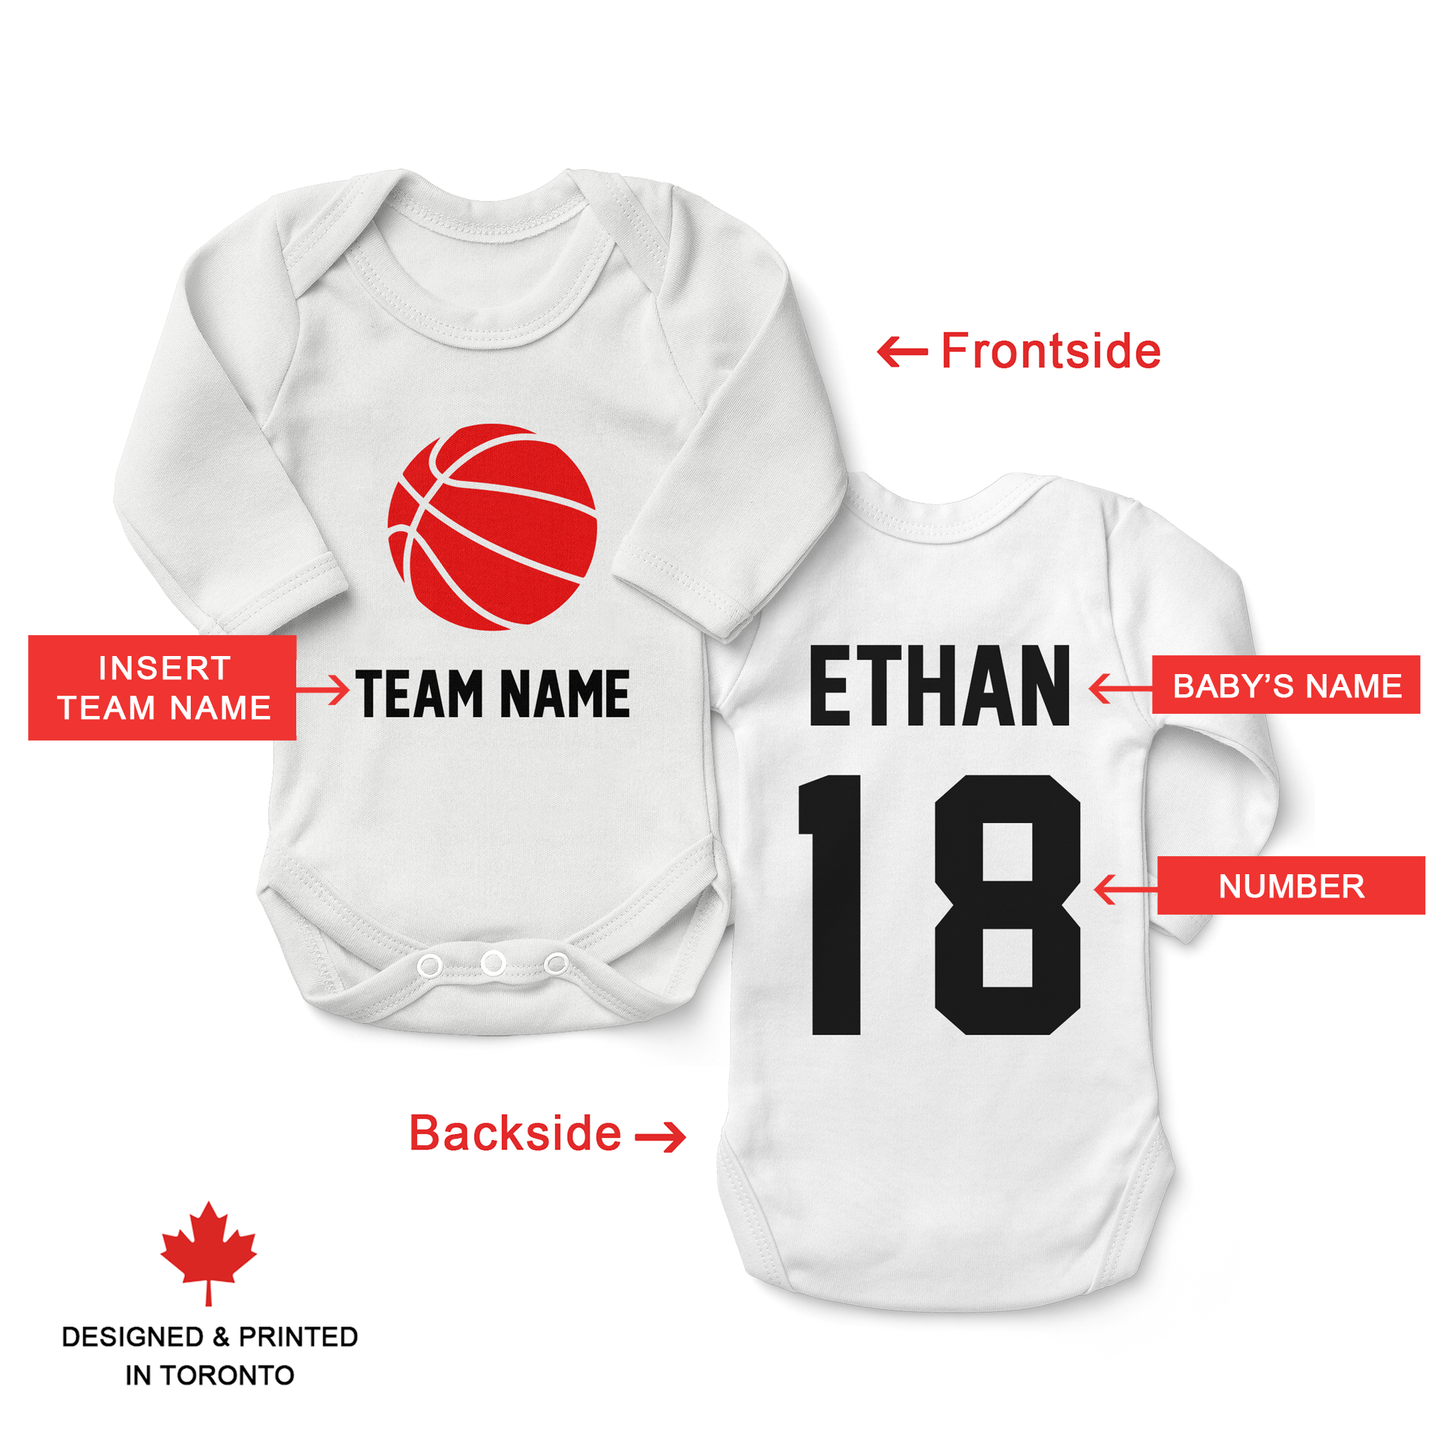 Zeronto Baby Gift Basket - Born in the North (Basketball)